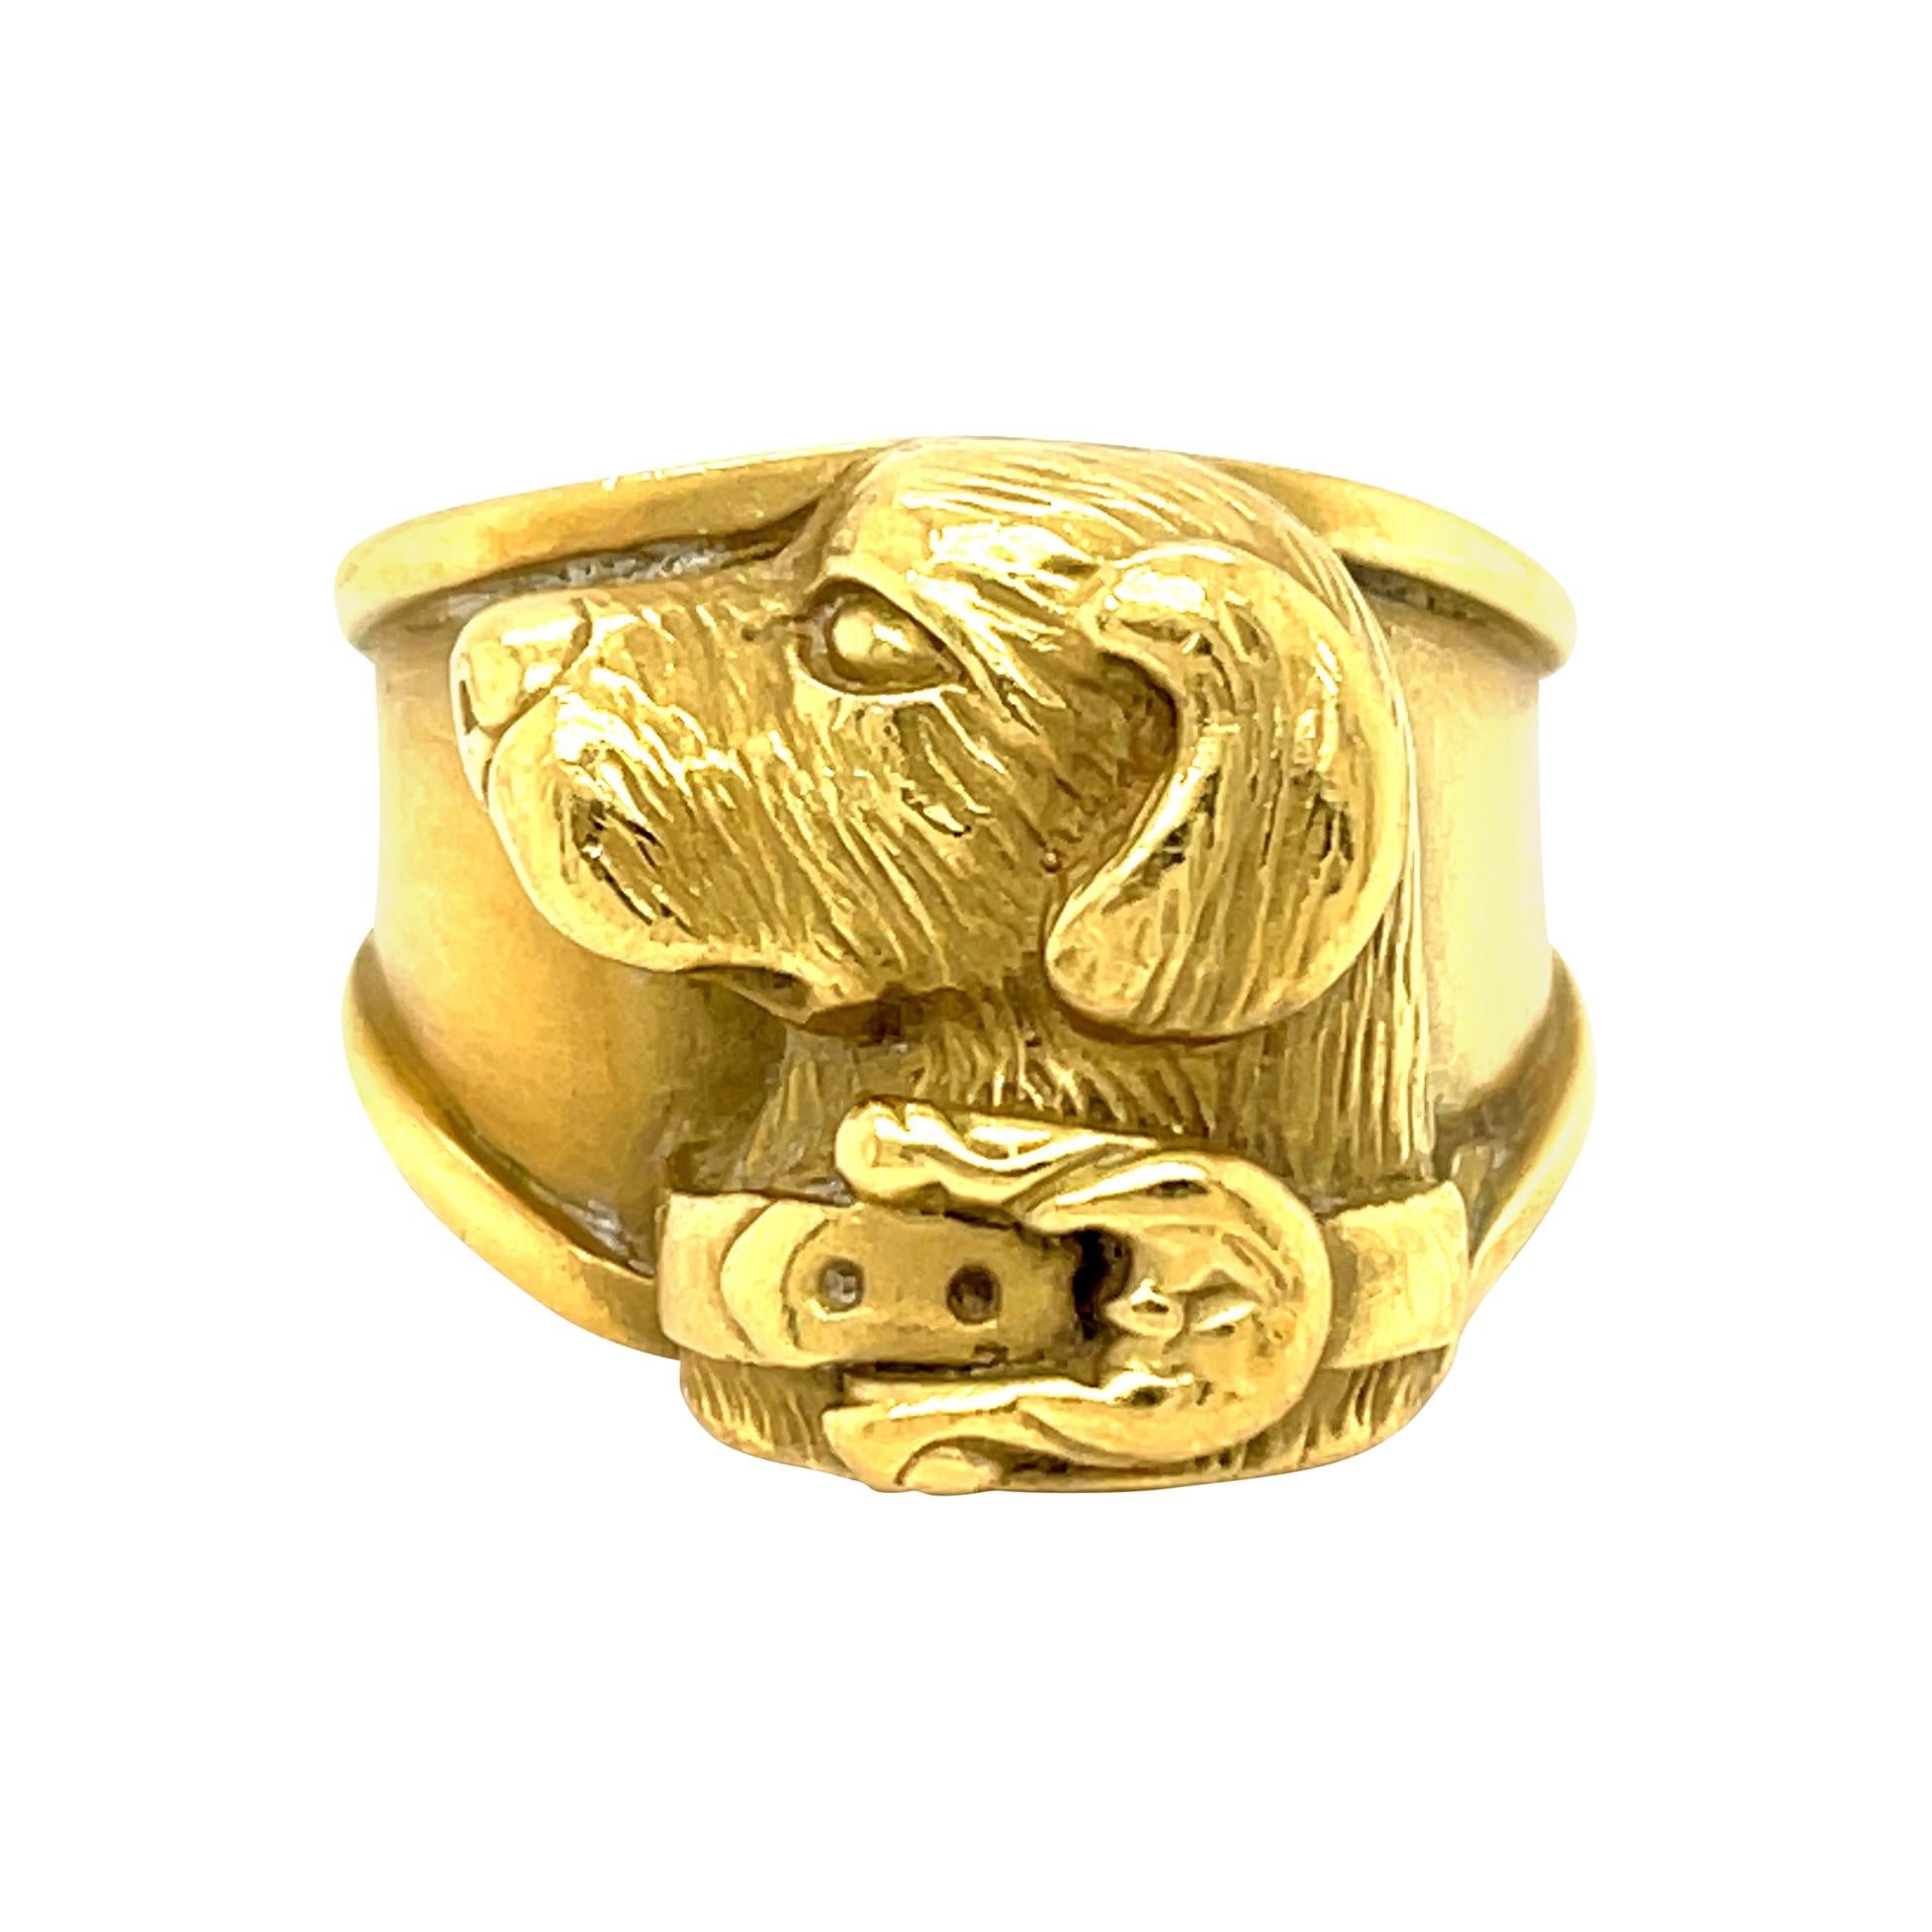 Vintage 18 Karat Yellow Gold Canine Ring by Keiselstein-Cord